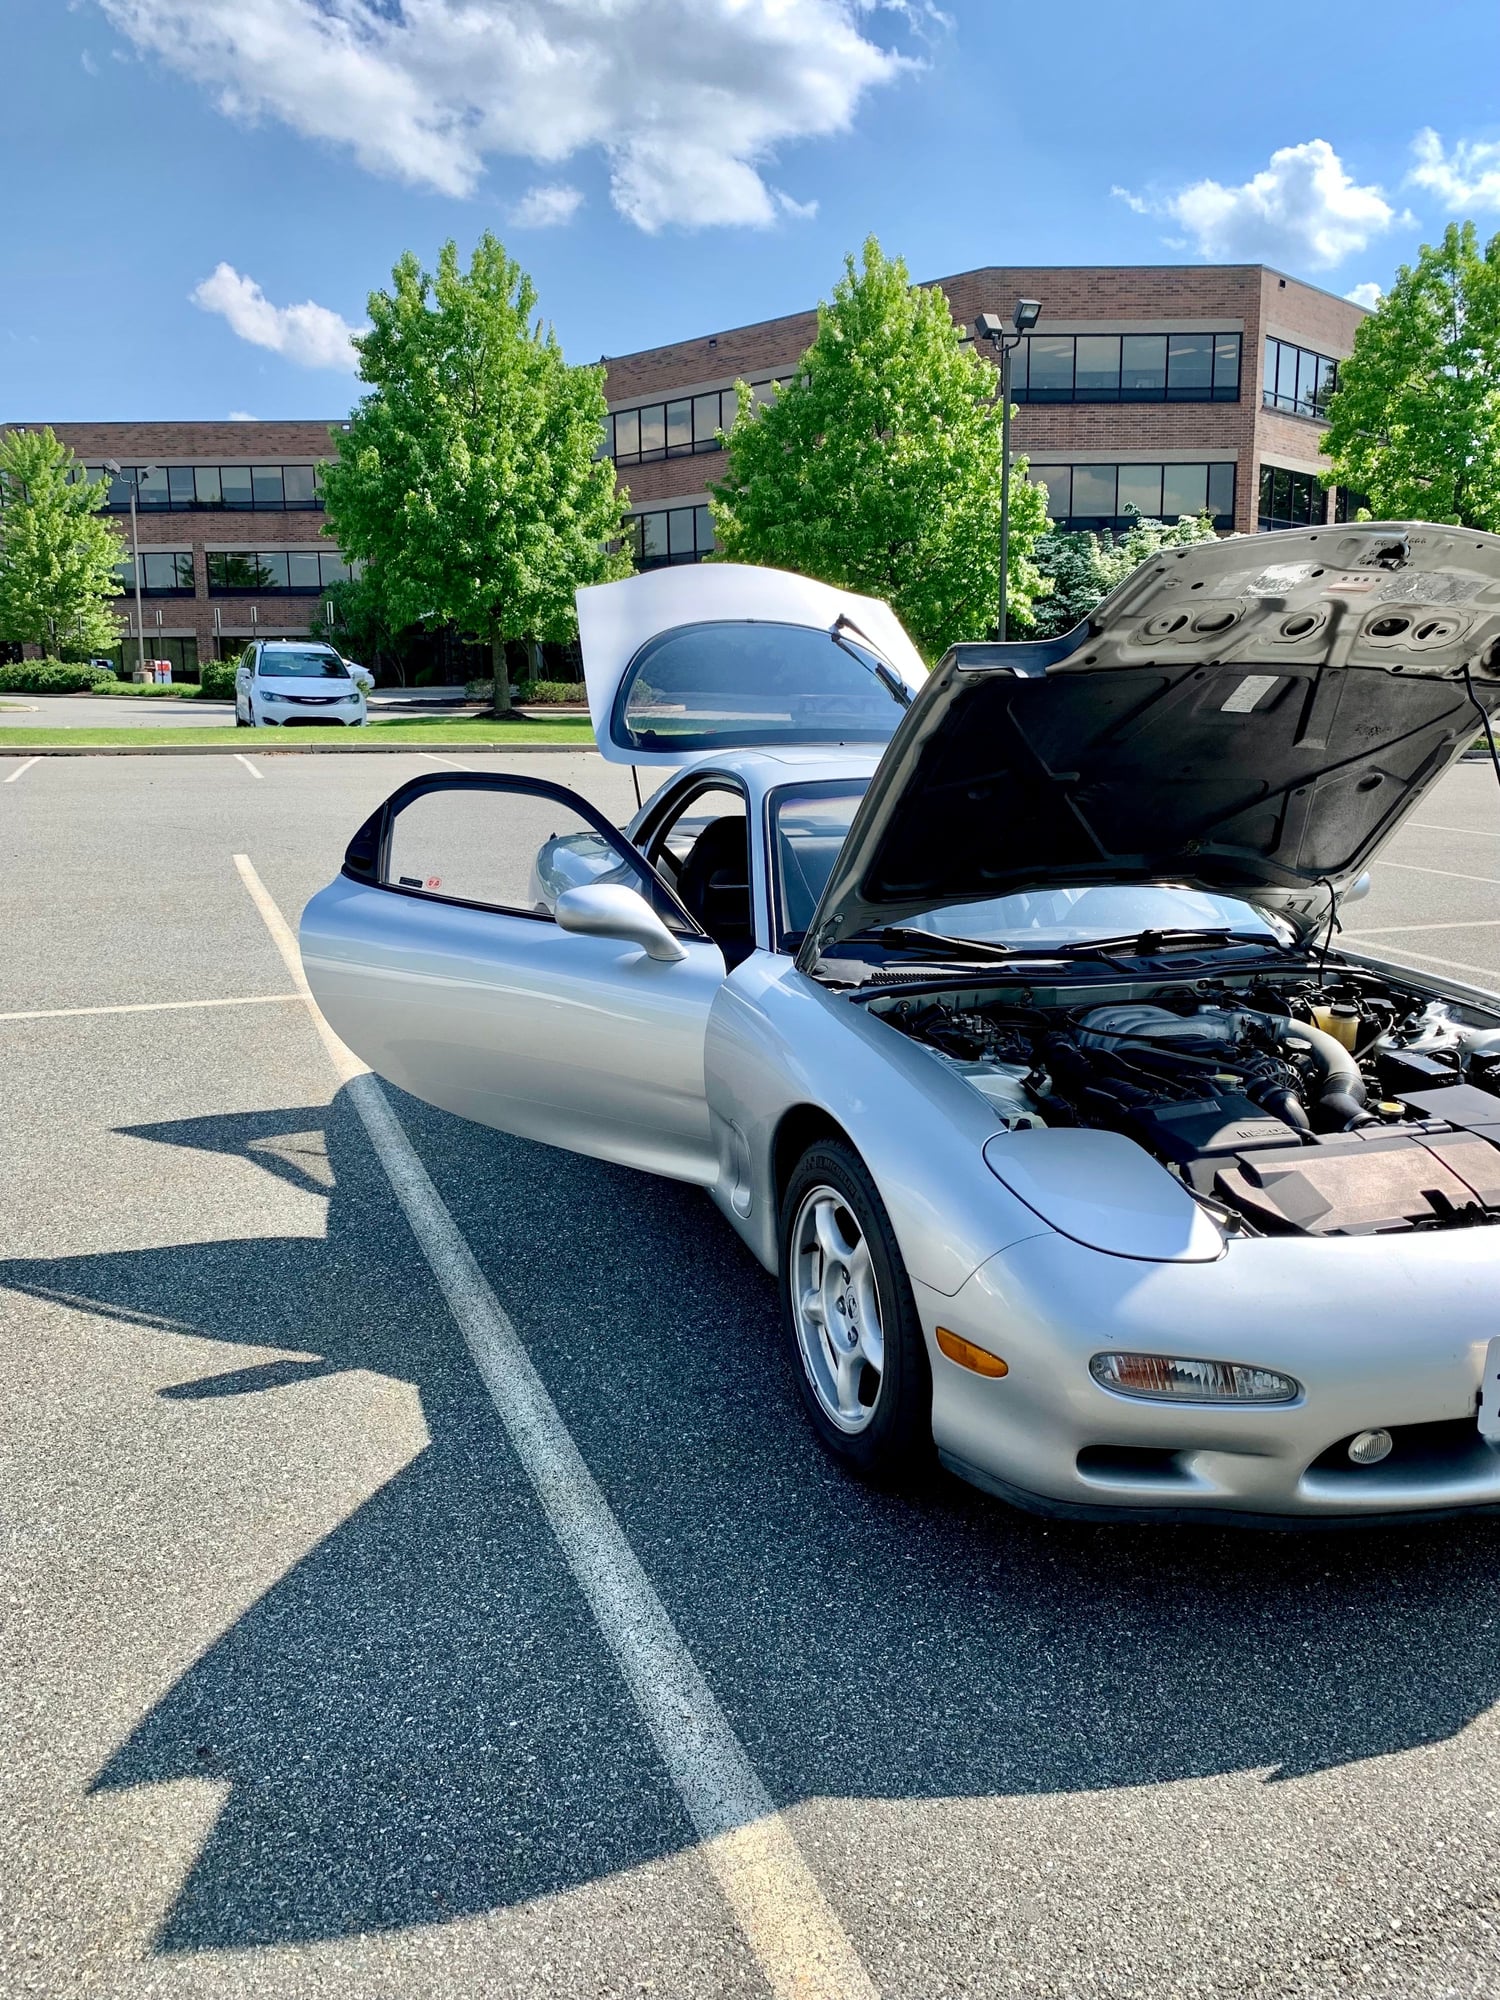 1993 Mazda RX-7 - 1993 SSM Touring 5-speed w/ 48,700 miles - Used - VIN JM1FD3311P0207768 - 48,700 Miles - Other - 2WD - Manual - Coupe - Silver - Breinigsville, PA 18031, United States